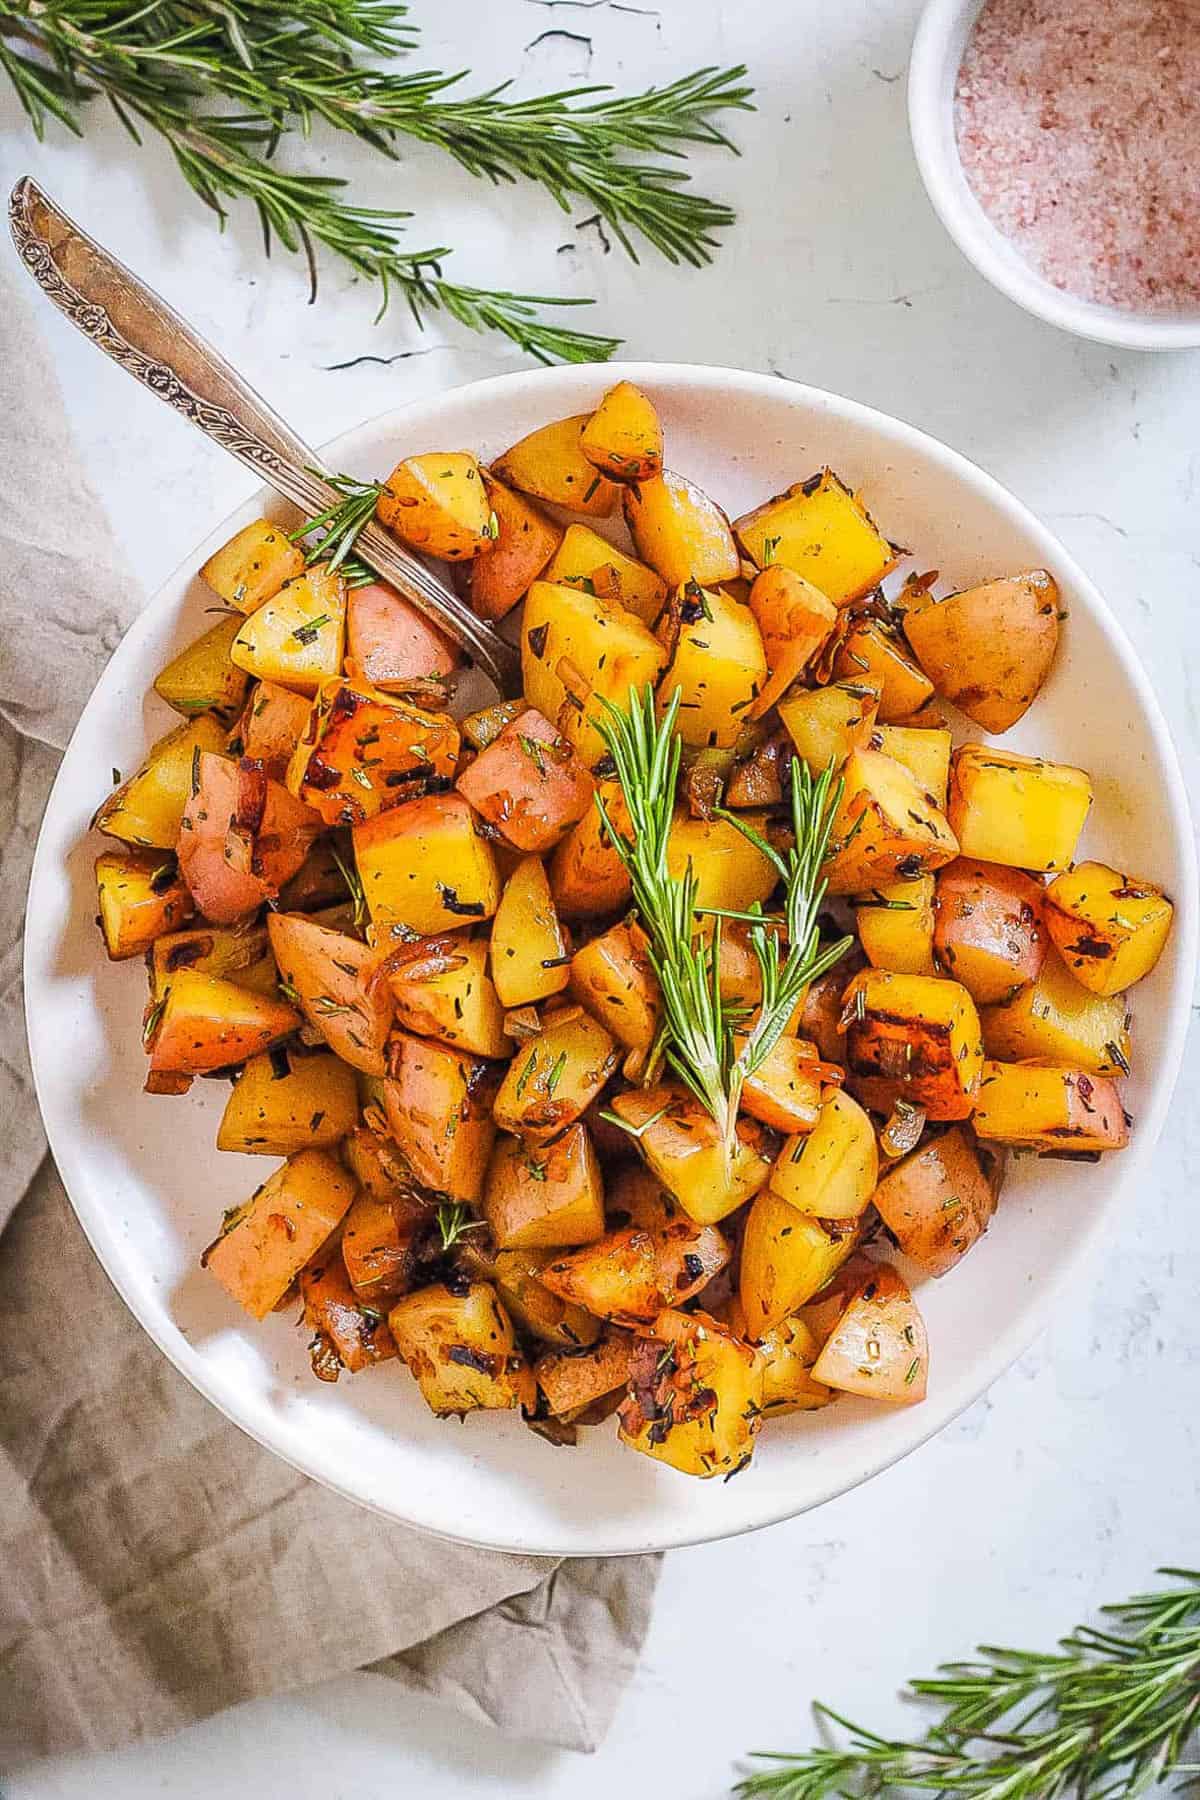 Fried potatoes in a white bowl with a spring of rosemary on top.